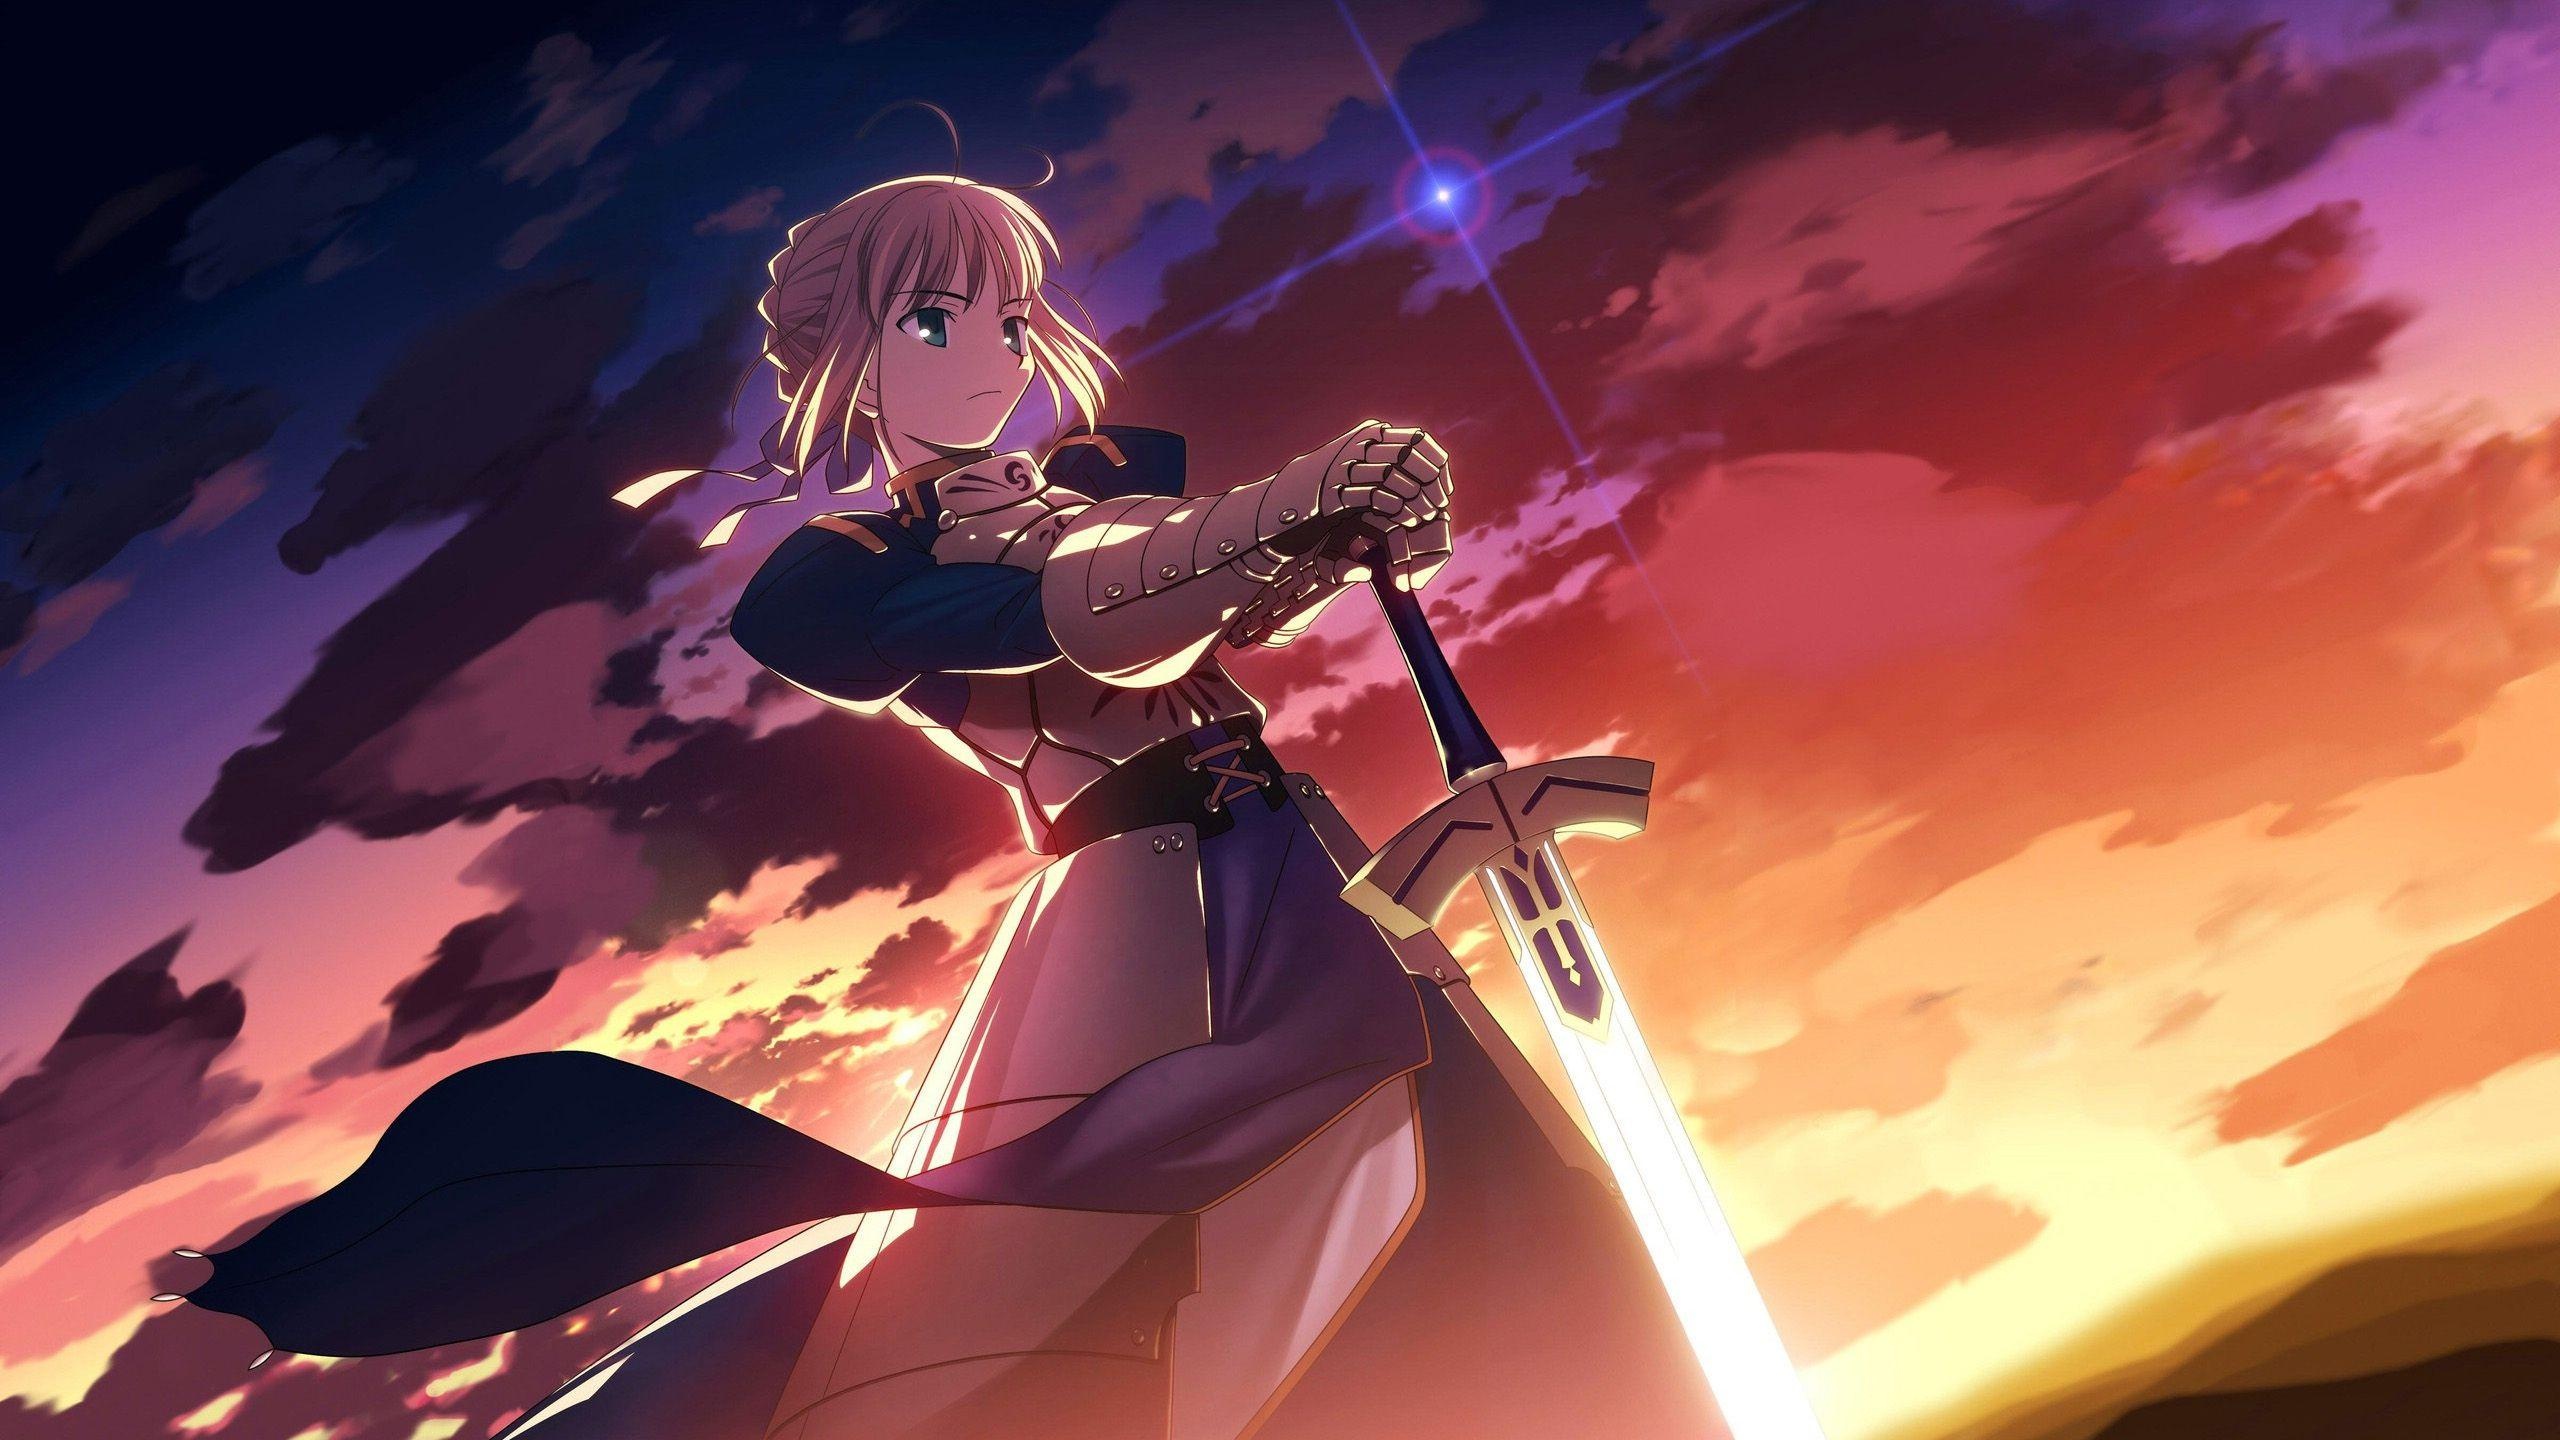 Fate/stay night: Unlimited Blade Works anime, Saber wallpapers, Heroic spirits, Epic swordfight, 2560x1440 HD Desktop